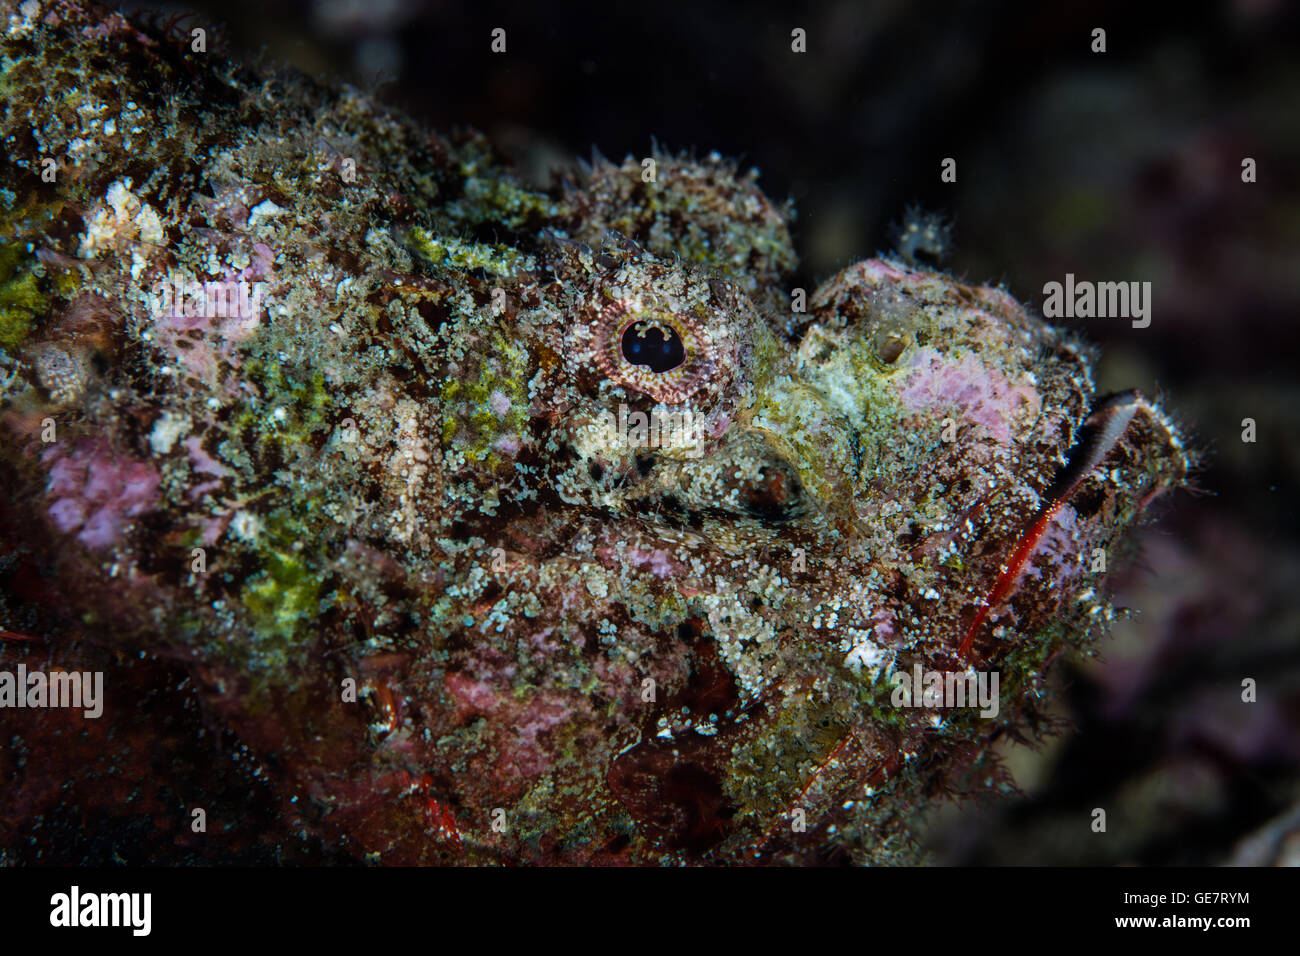 A well-camouflaged Devil scorpionfish (Scorpaenopsis diabolus) lays on a diverse coral reef in Raja Ampat, Indonesia. Stock Photo